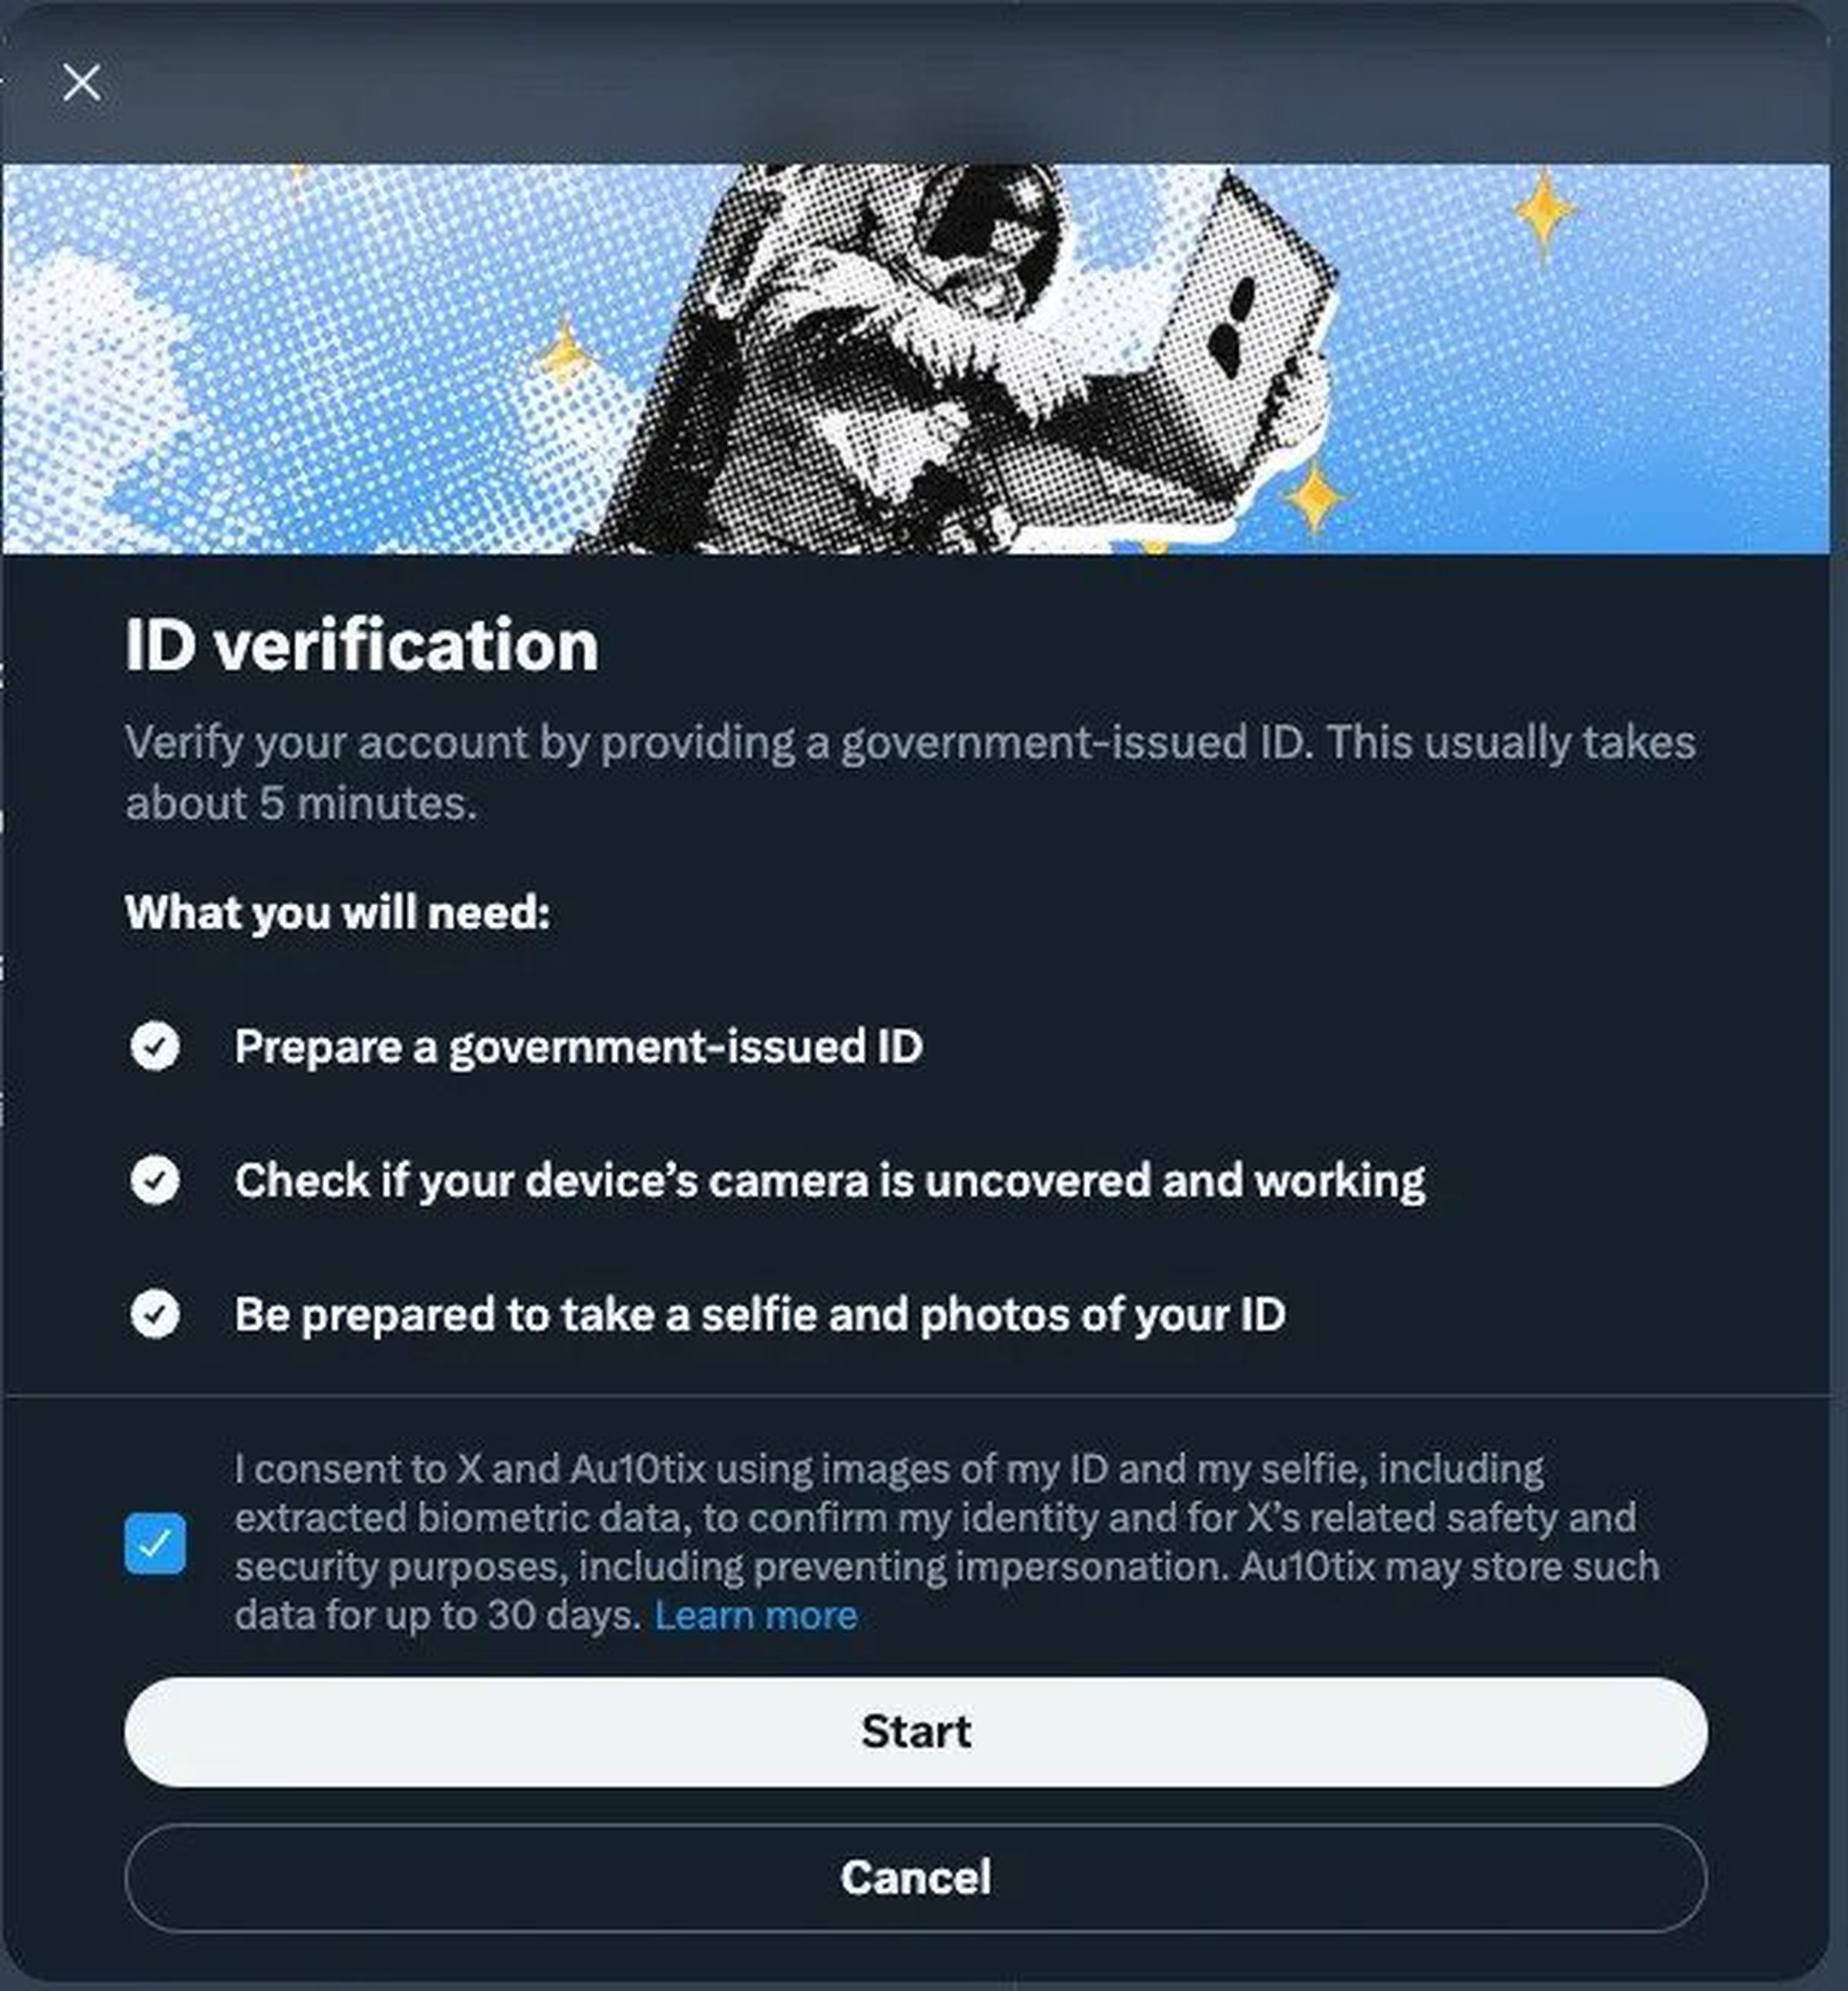 Some users will be prompted to verify their accounts using government-issued IDs via a pop-up window.